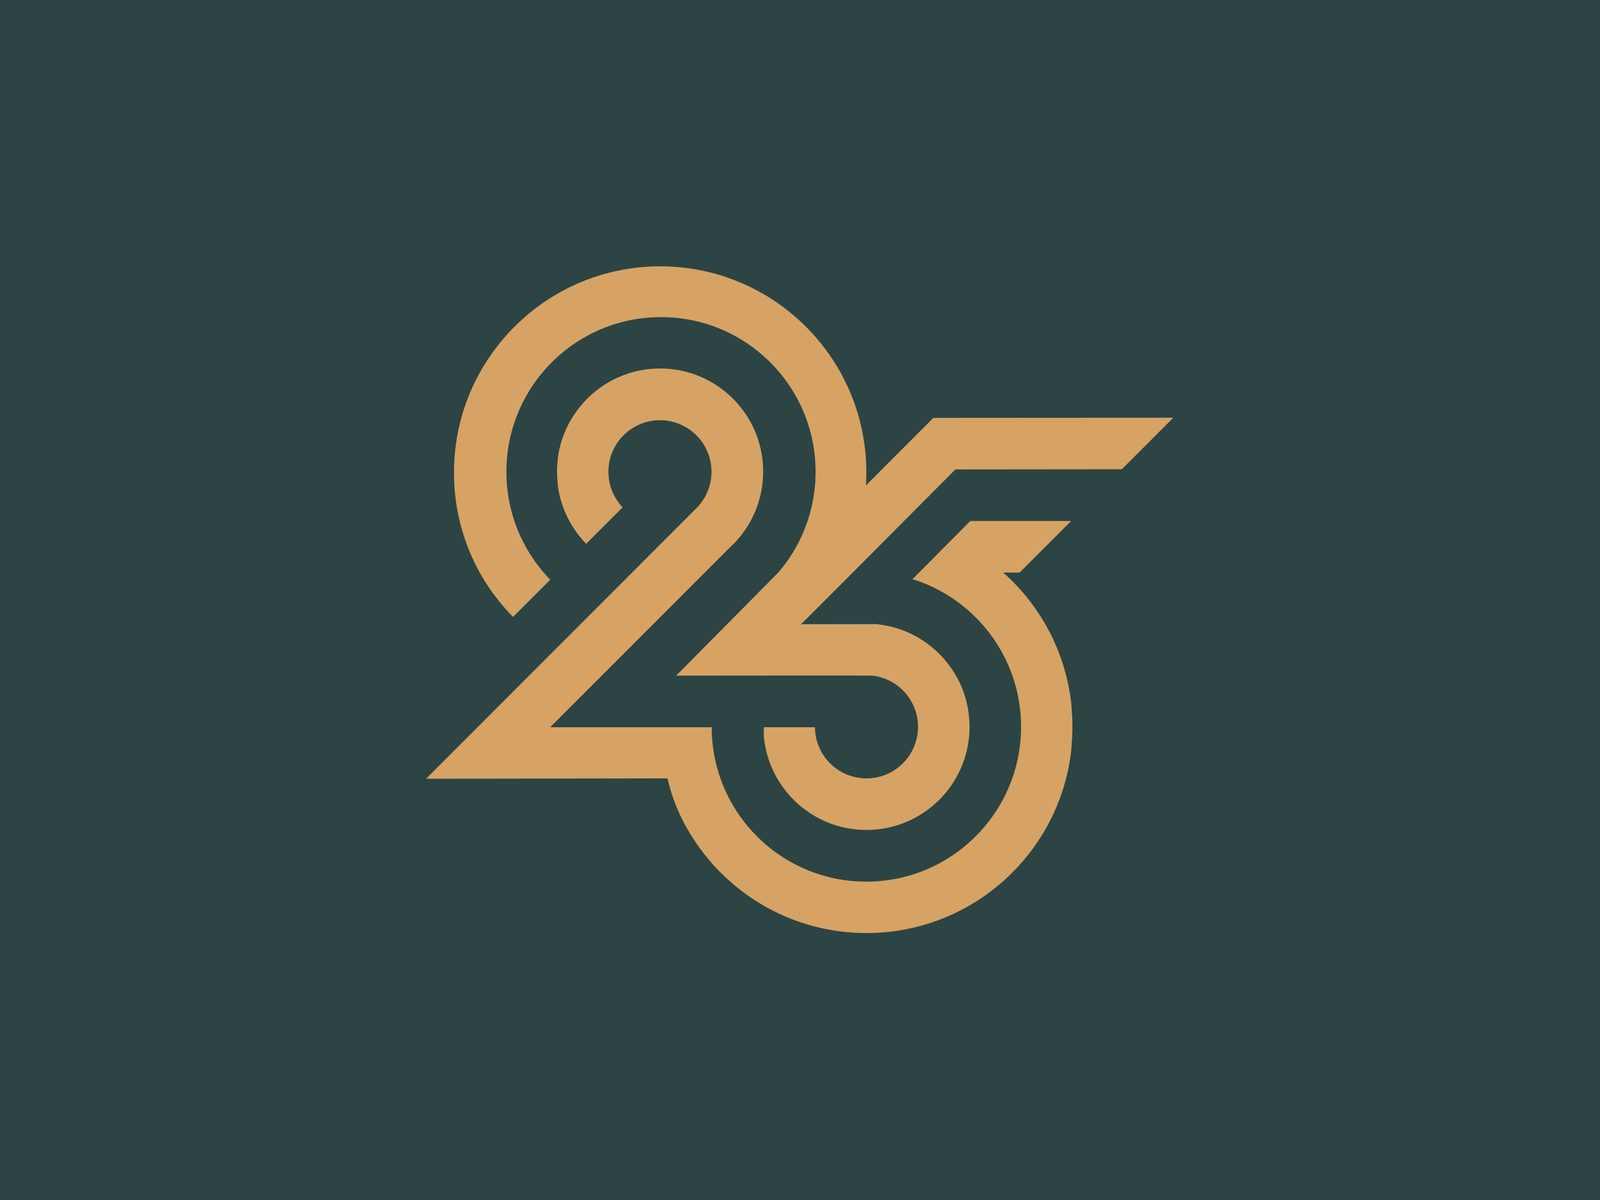 Number 25 by Pedro Monteiro on Dribbble
